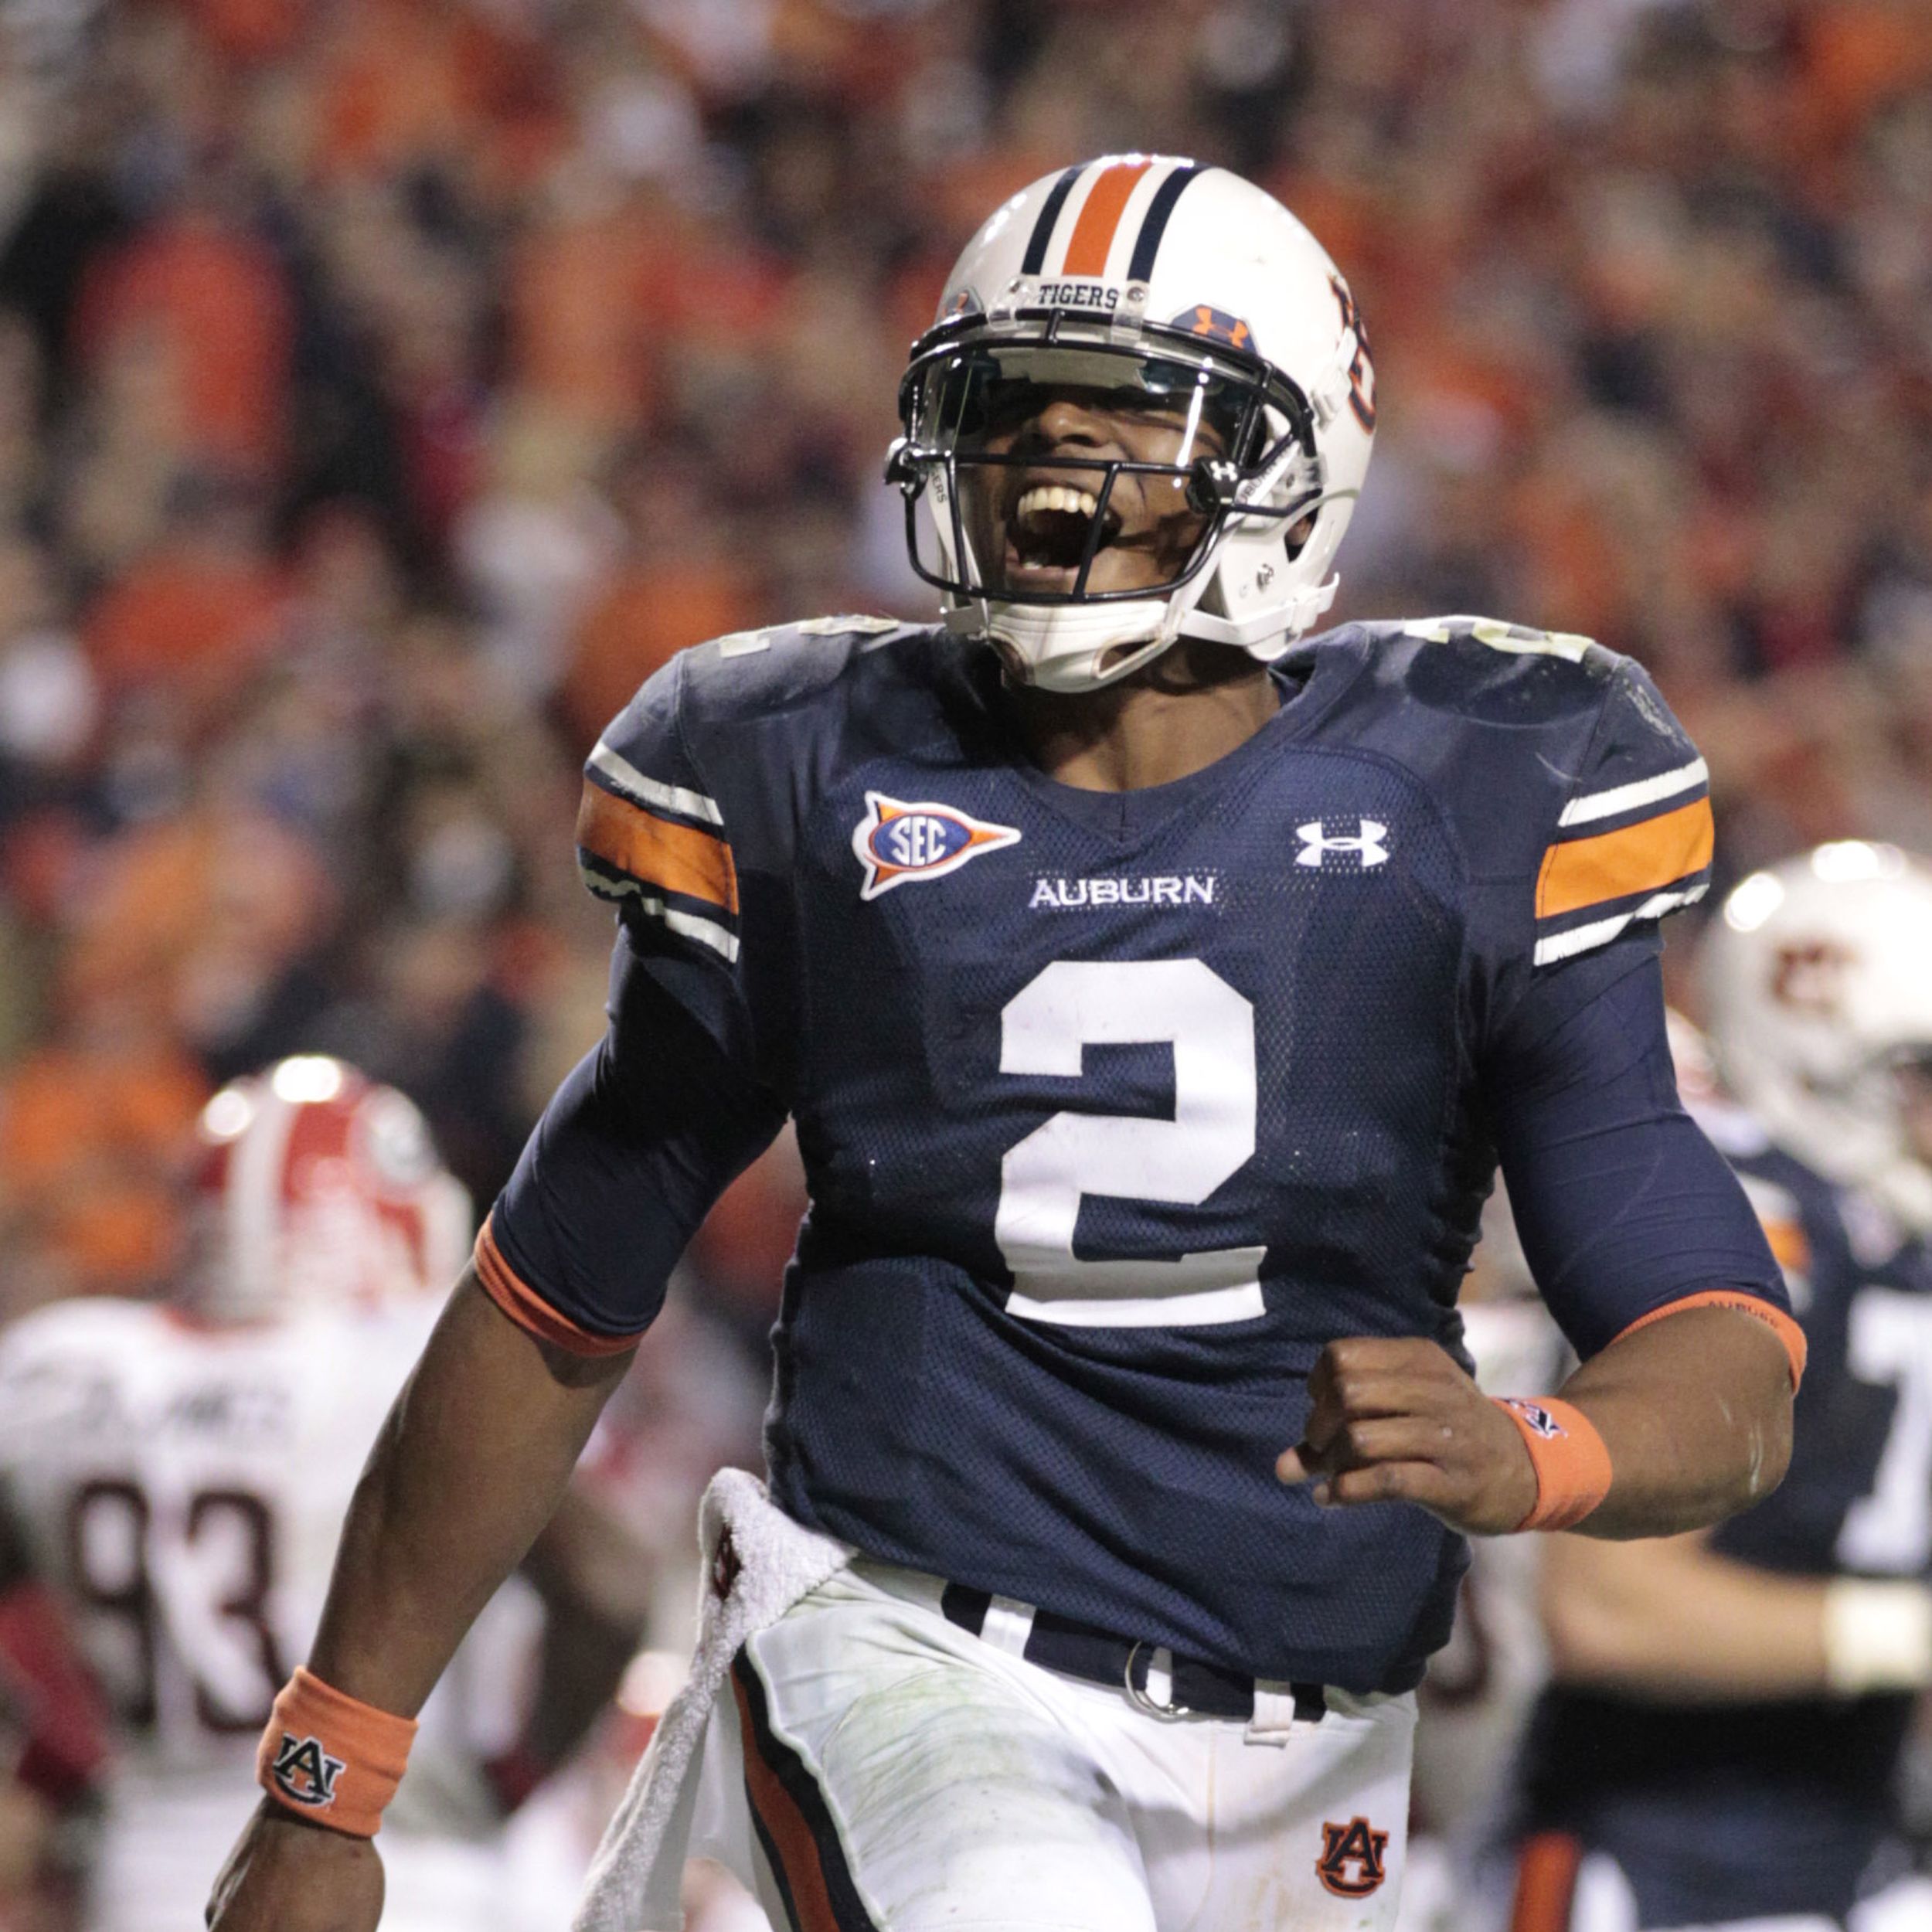 Nation's top two offenses square off in BCS championship game